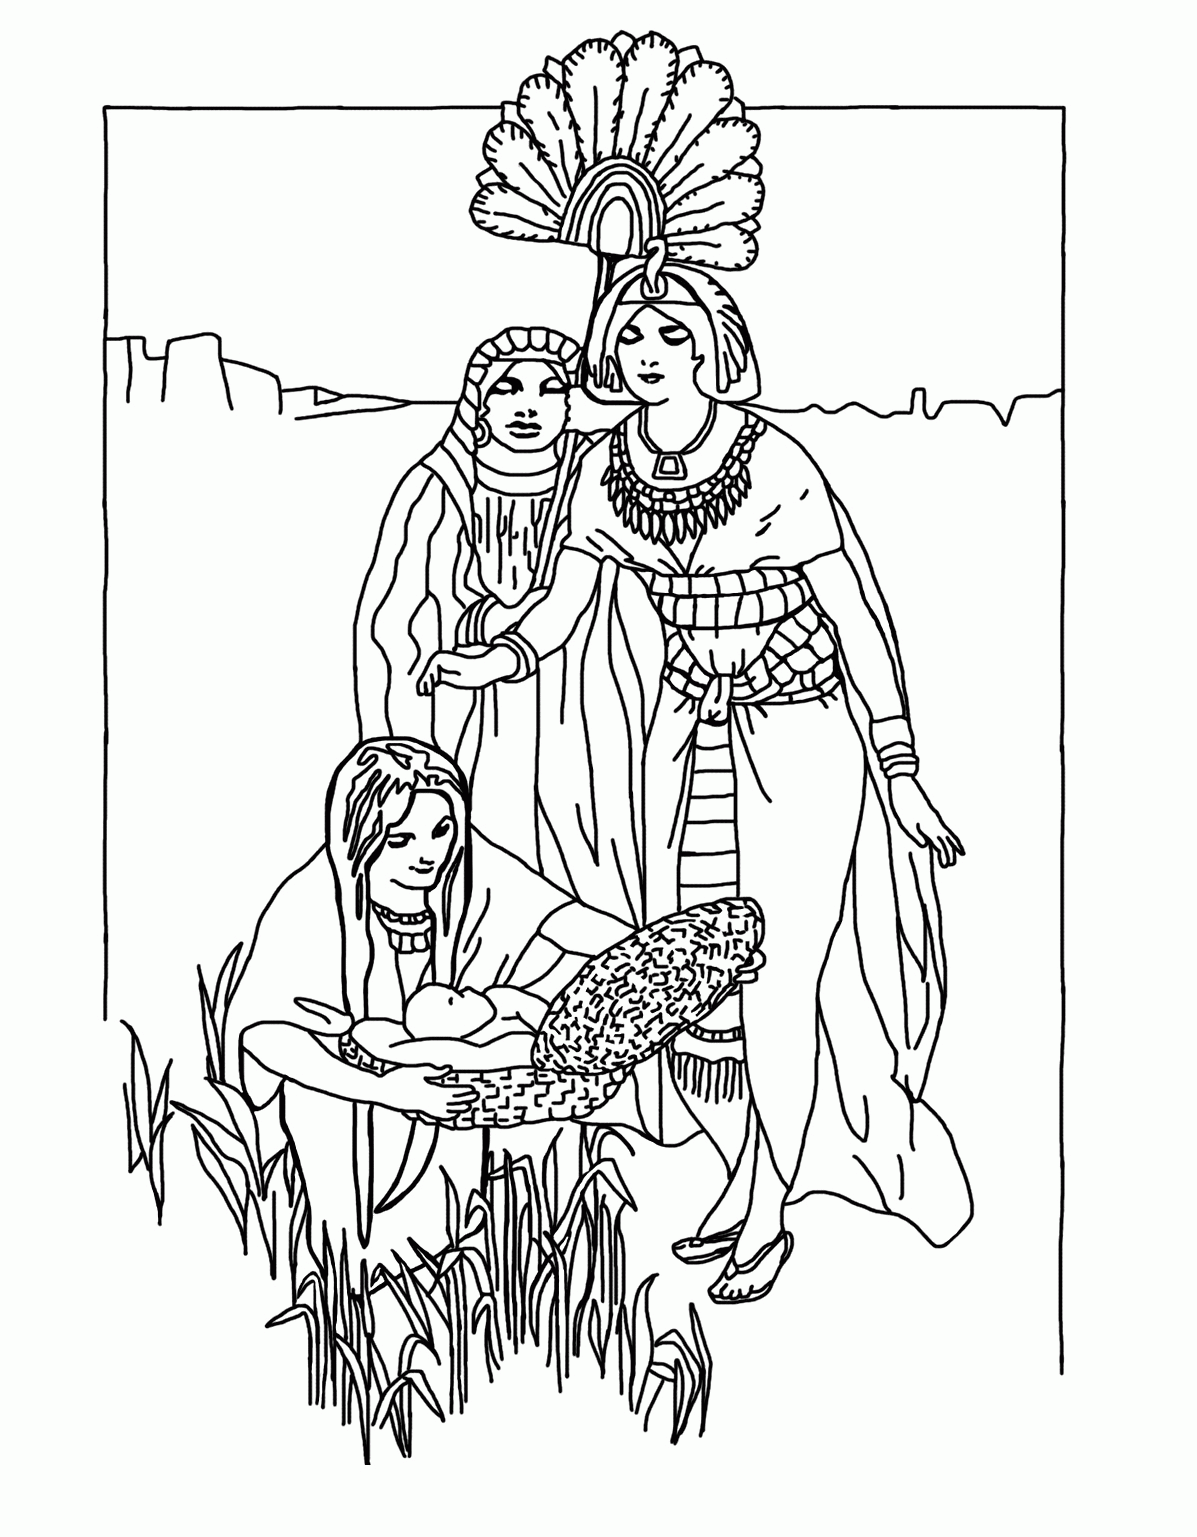 Baby Moses Coloring Page - Coloring Home